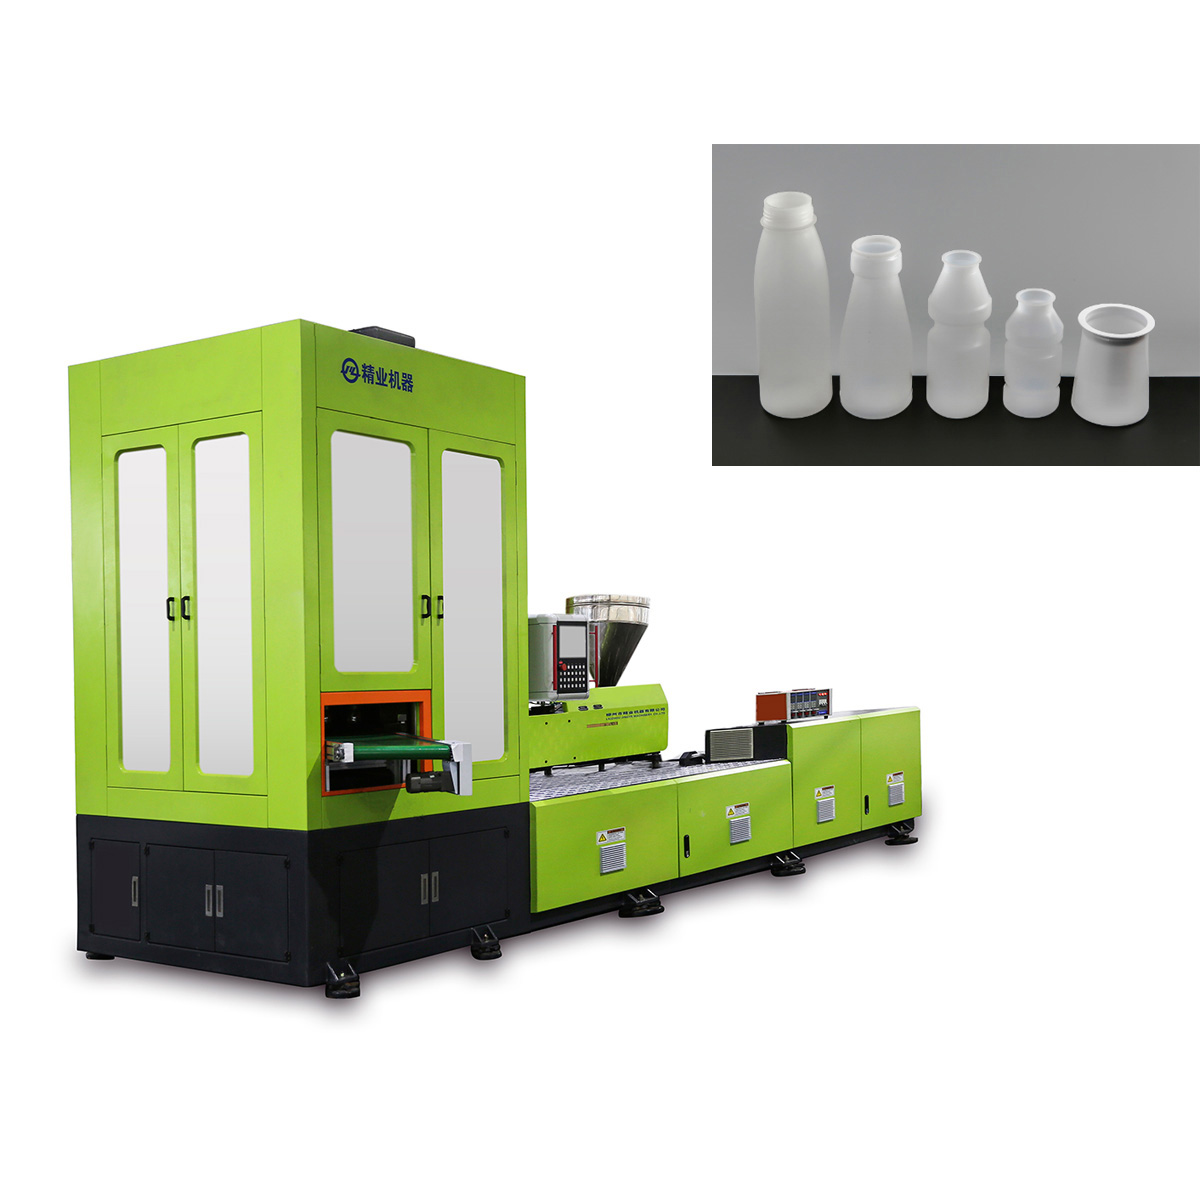 Single Stage Injection Stretch Blow Molding (ISBM) Machine For Making Food / Beverage Bottle Featured Image